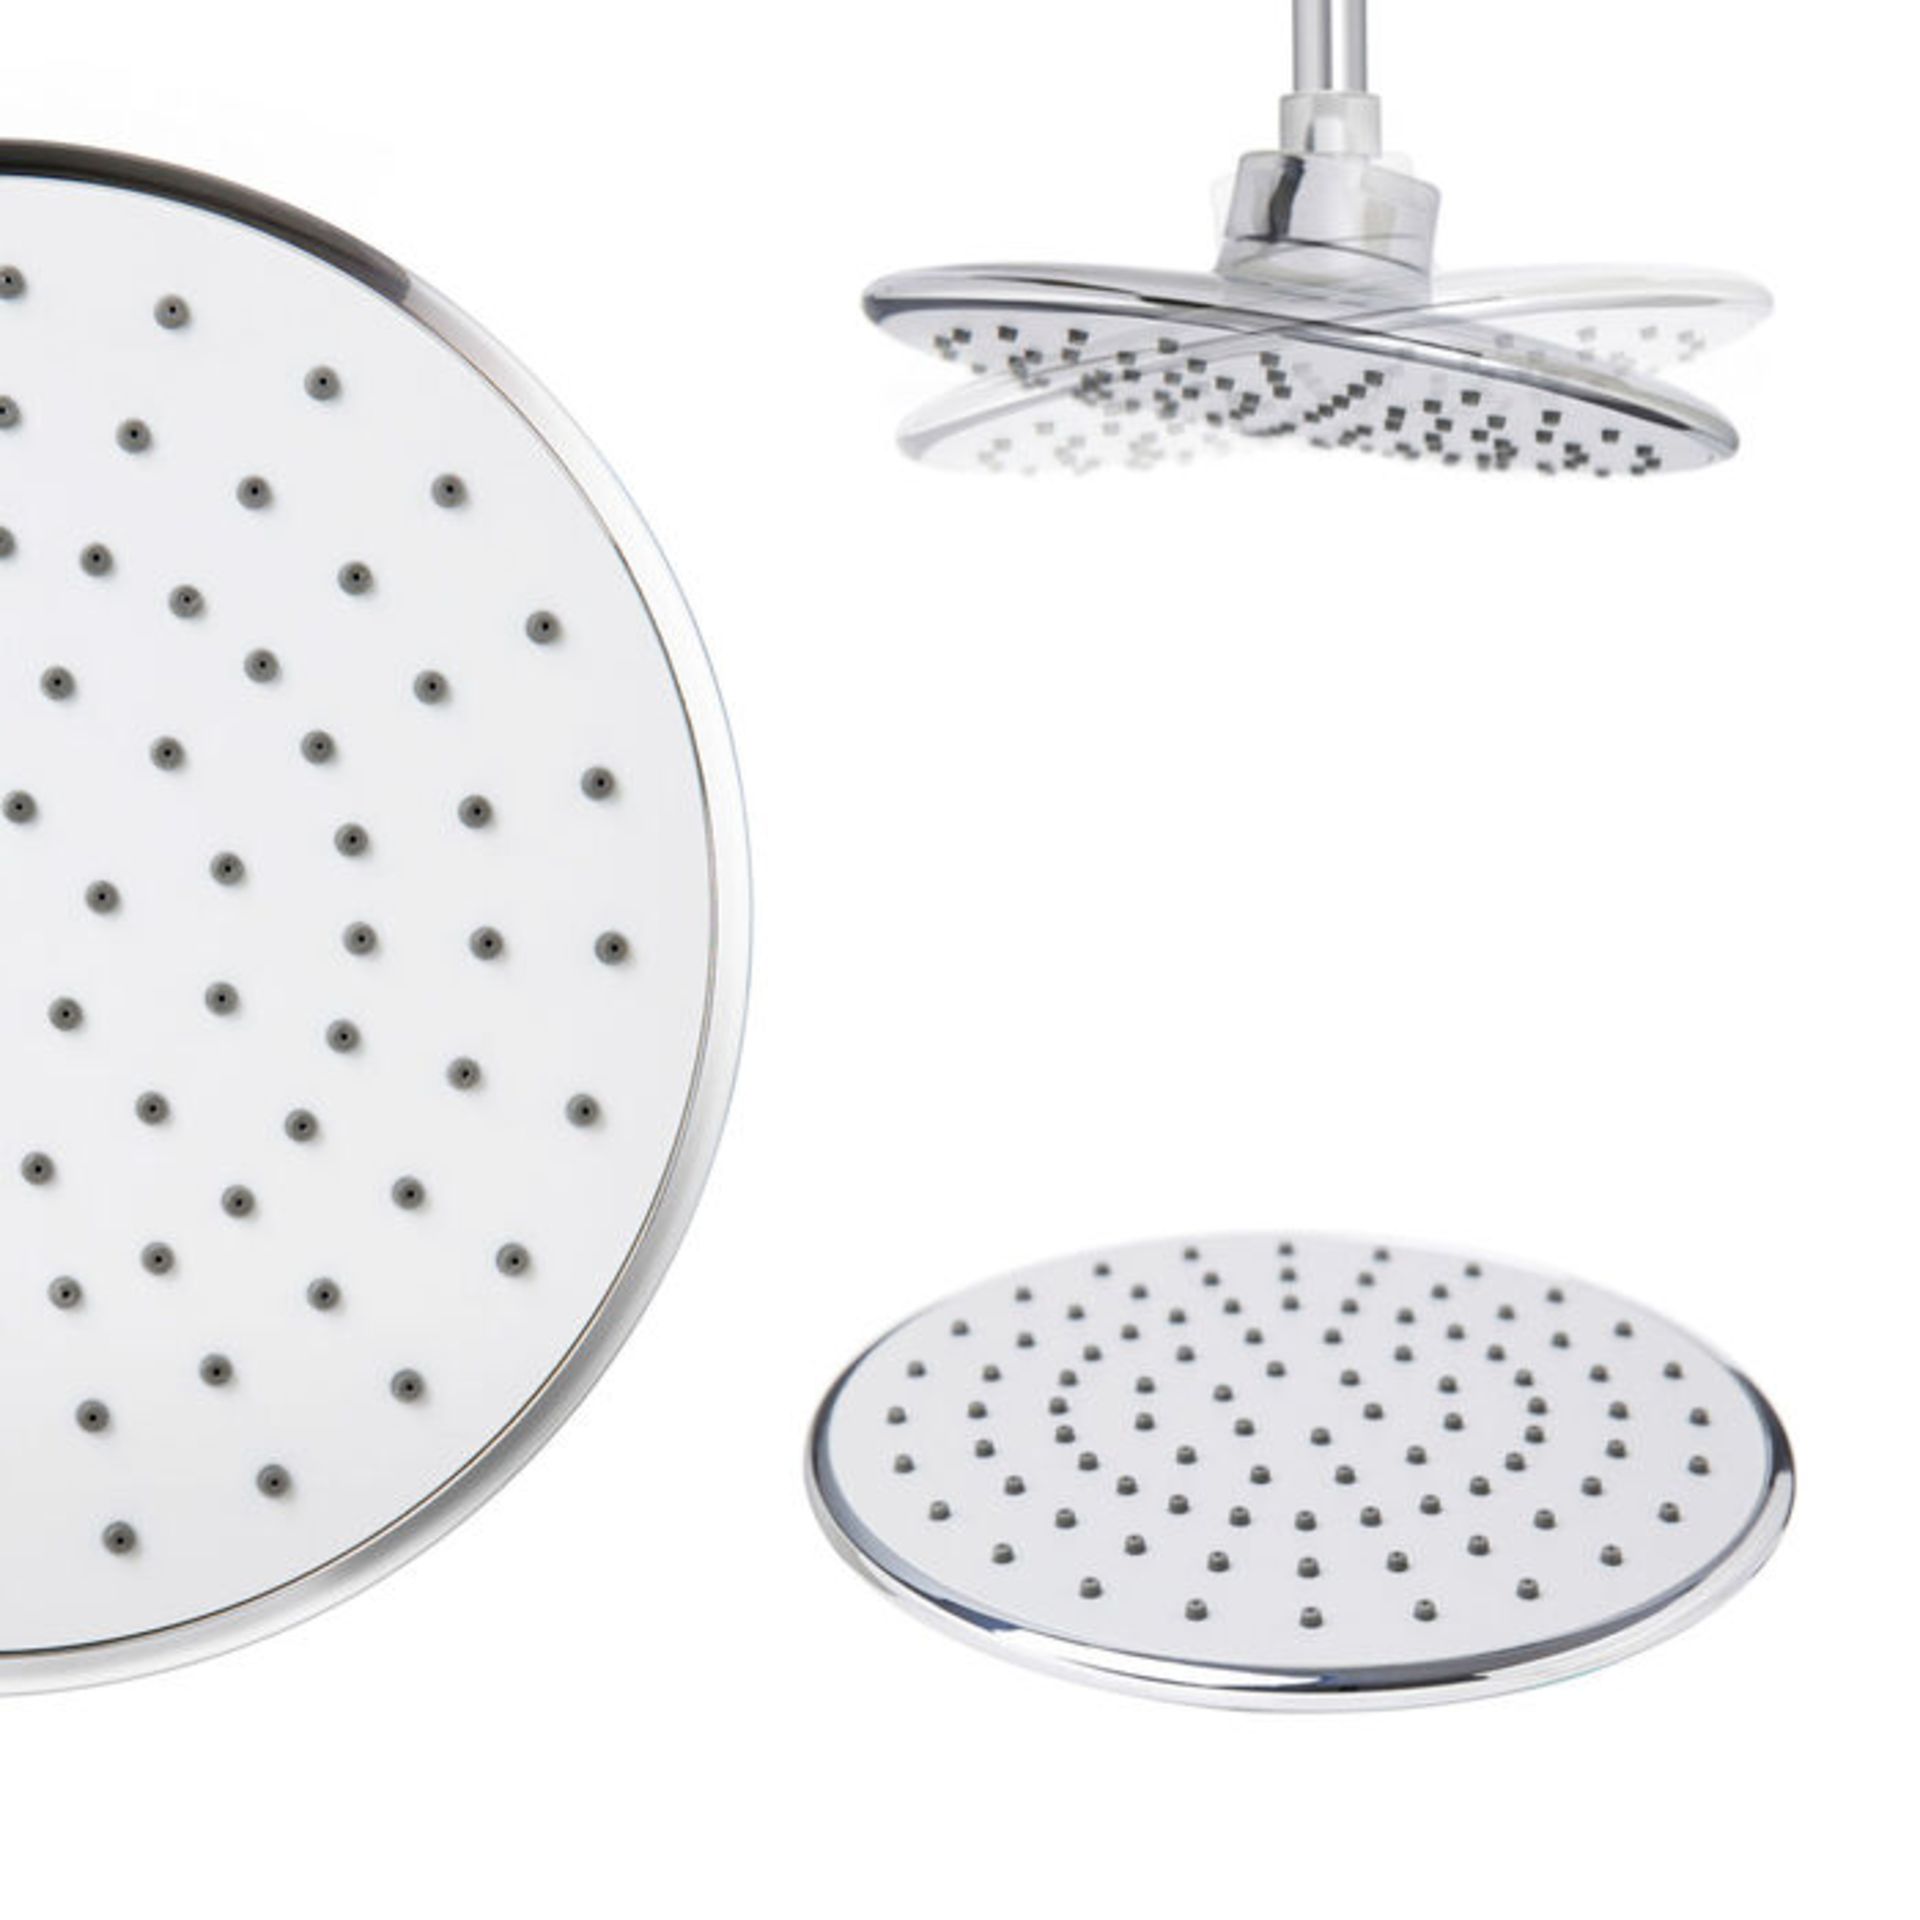 (EE1017) 200mm Round Shower Head. Solid metal structure Can be wall or ceiling mounted Featur...